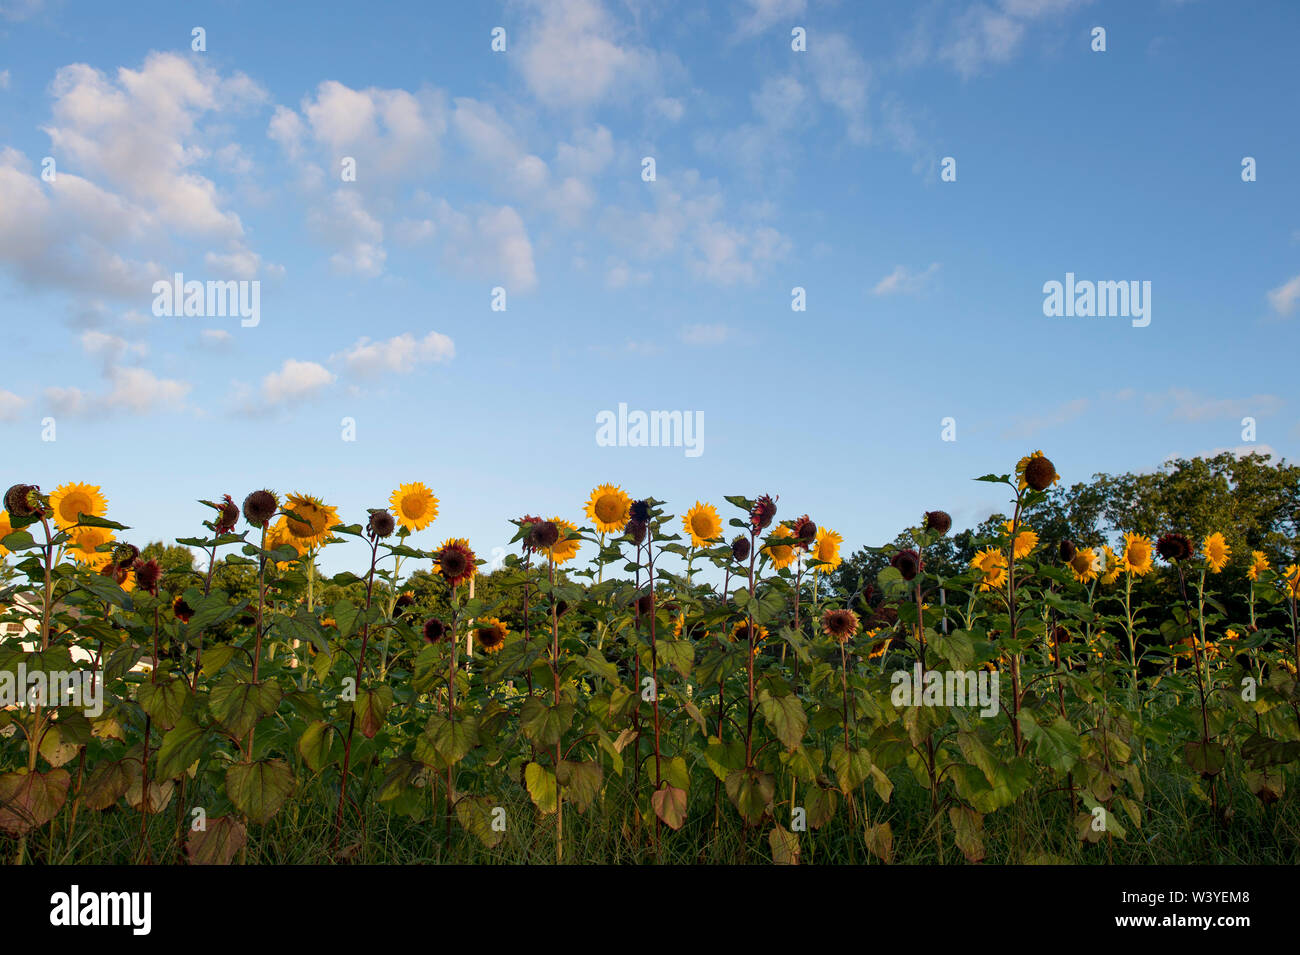 A row of bright yellow sunflowers face the sun with a blue sky and puffy white clouds. Stock Photo